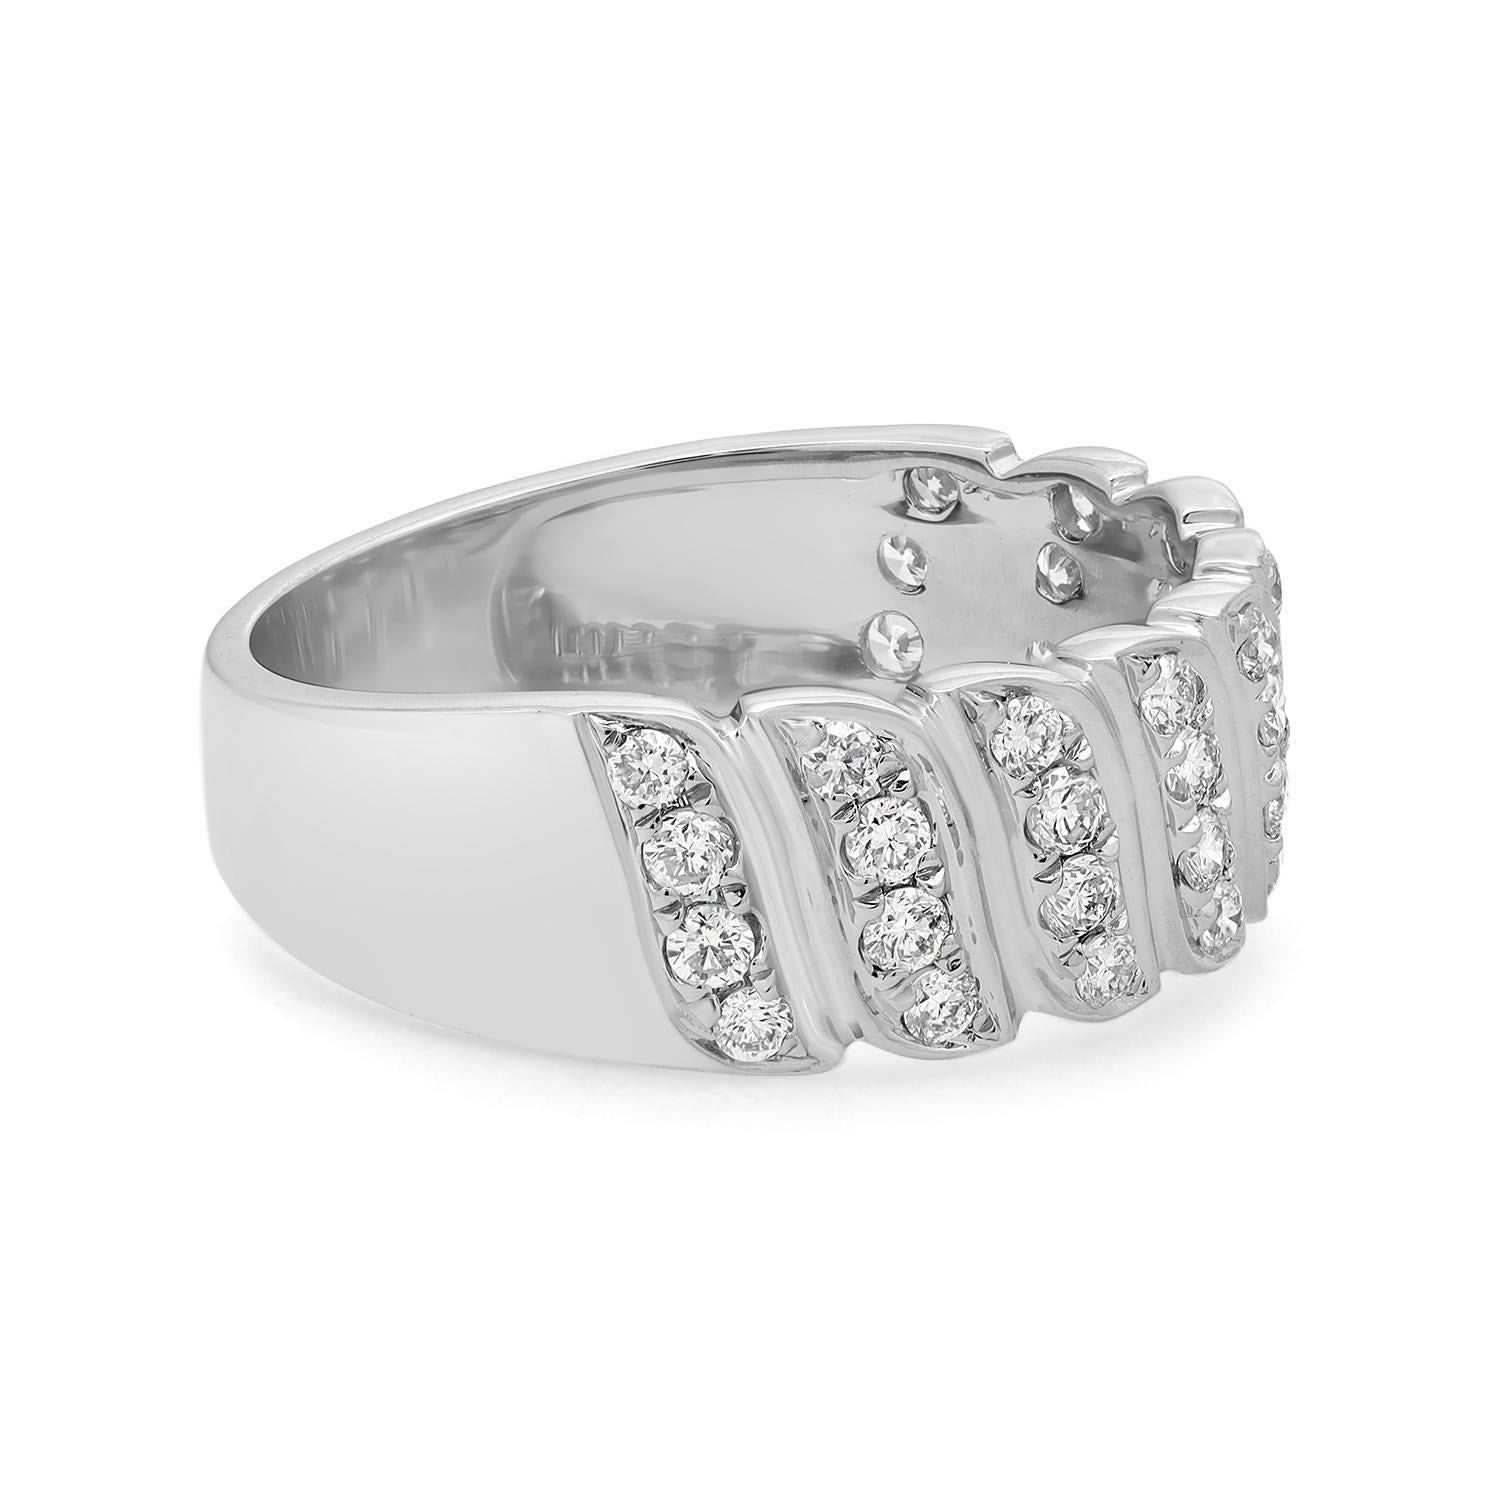 This timeless and stylish diamond band ring is crafted in 18k white gold and features 36 pave set dazzling round brilliant cut diamonds weighing 0.52 carat. Diamond quality: G-H and clarity VS-SI. A spectacular symbol of love, perfect for a gift or